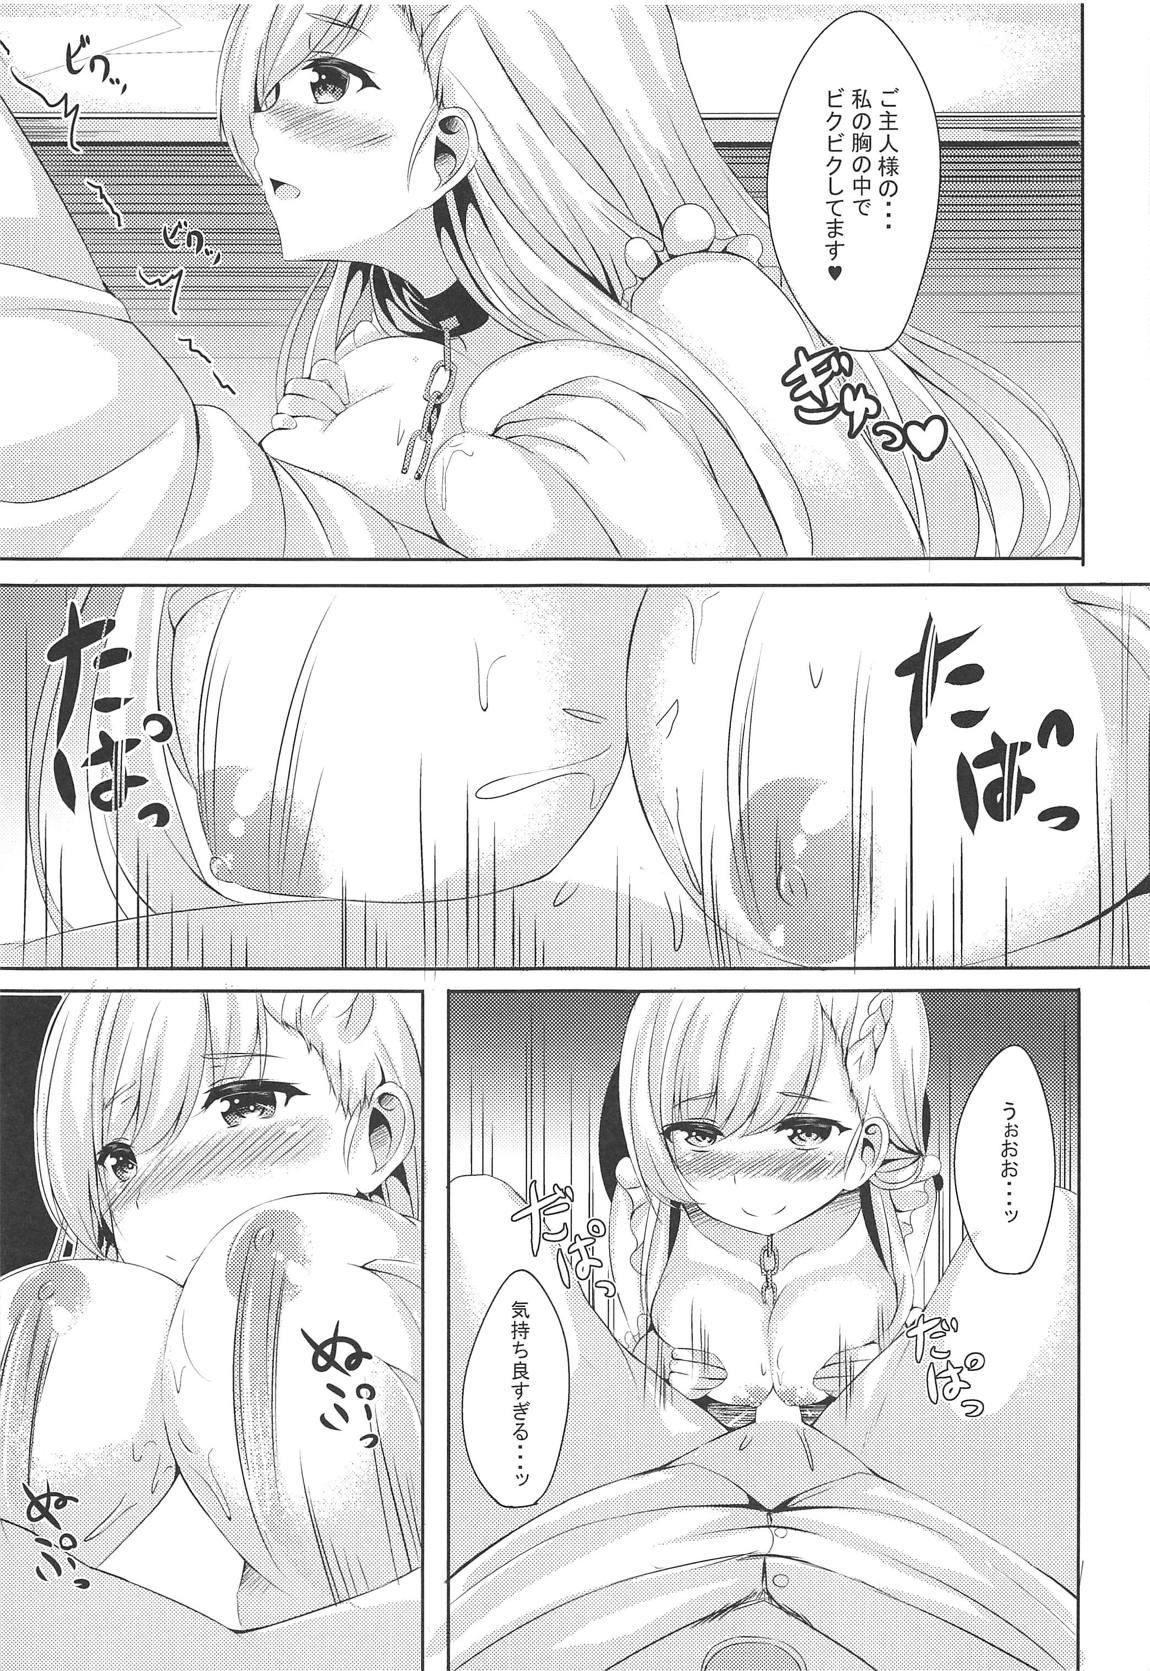 4some ring the bell - Azur lane Caught - Page 11